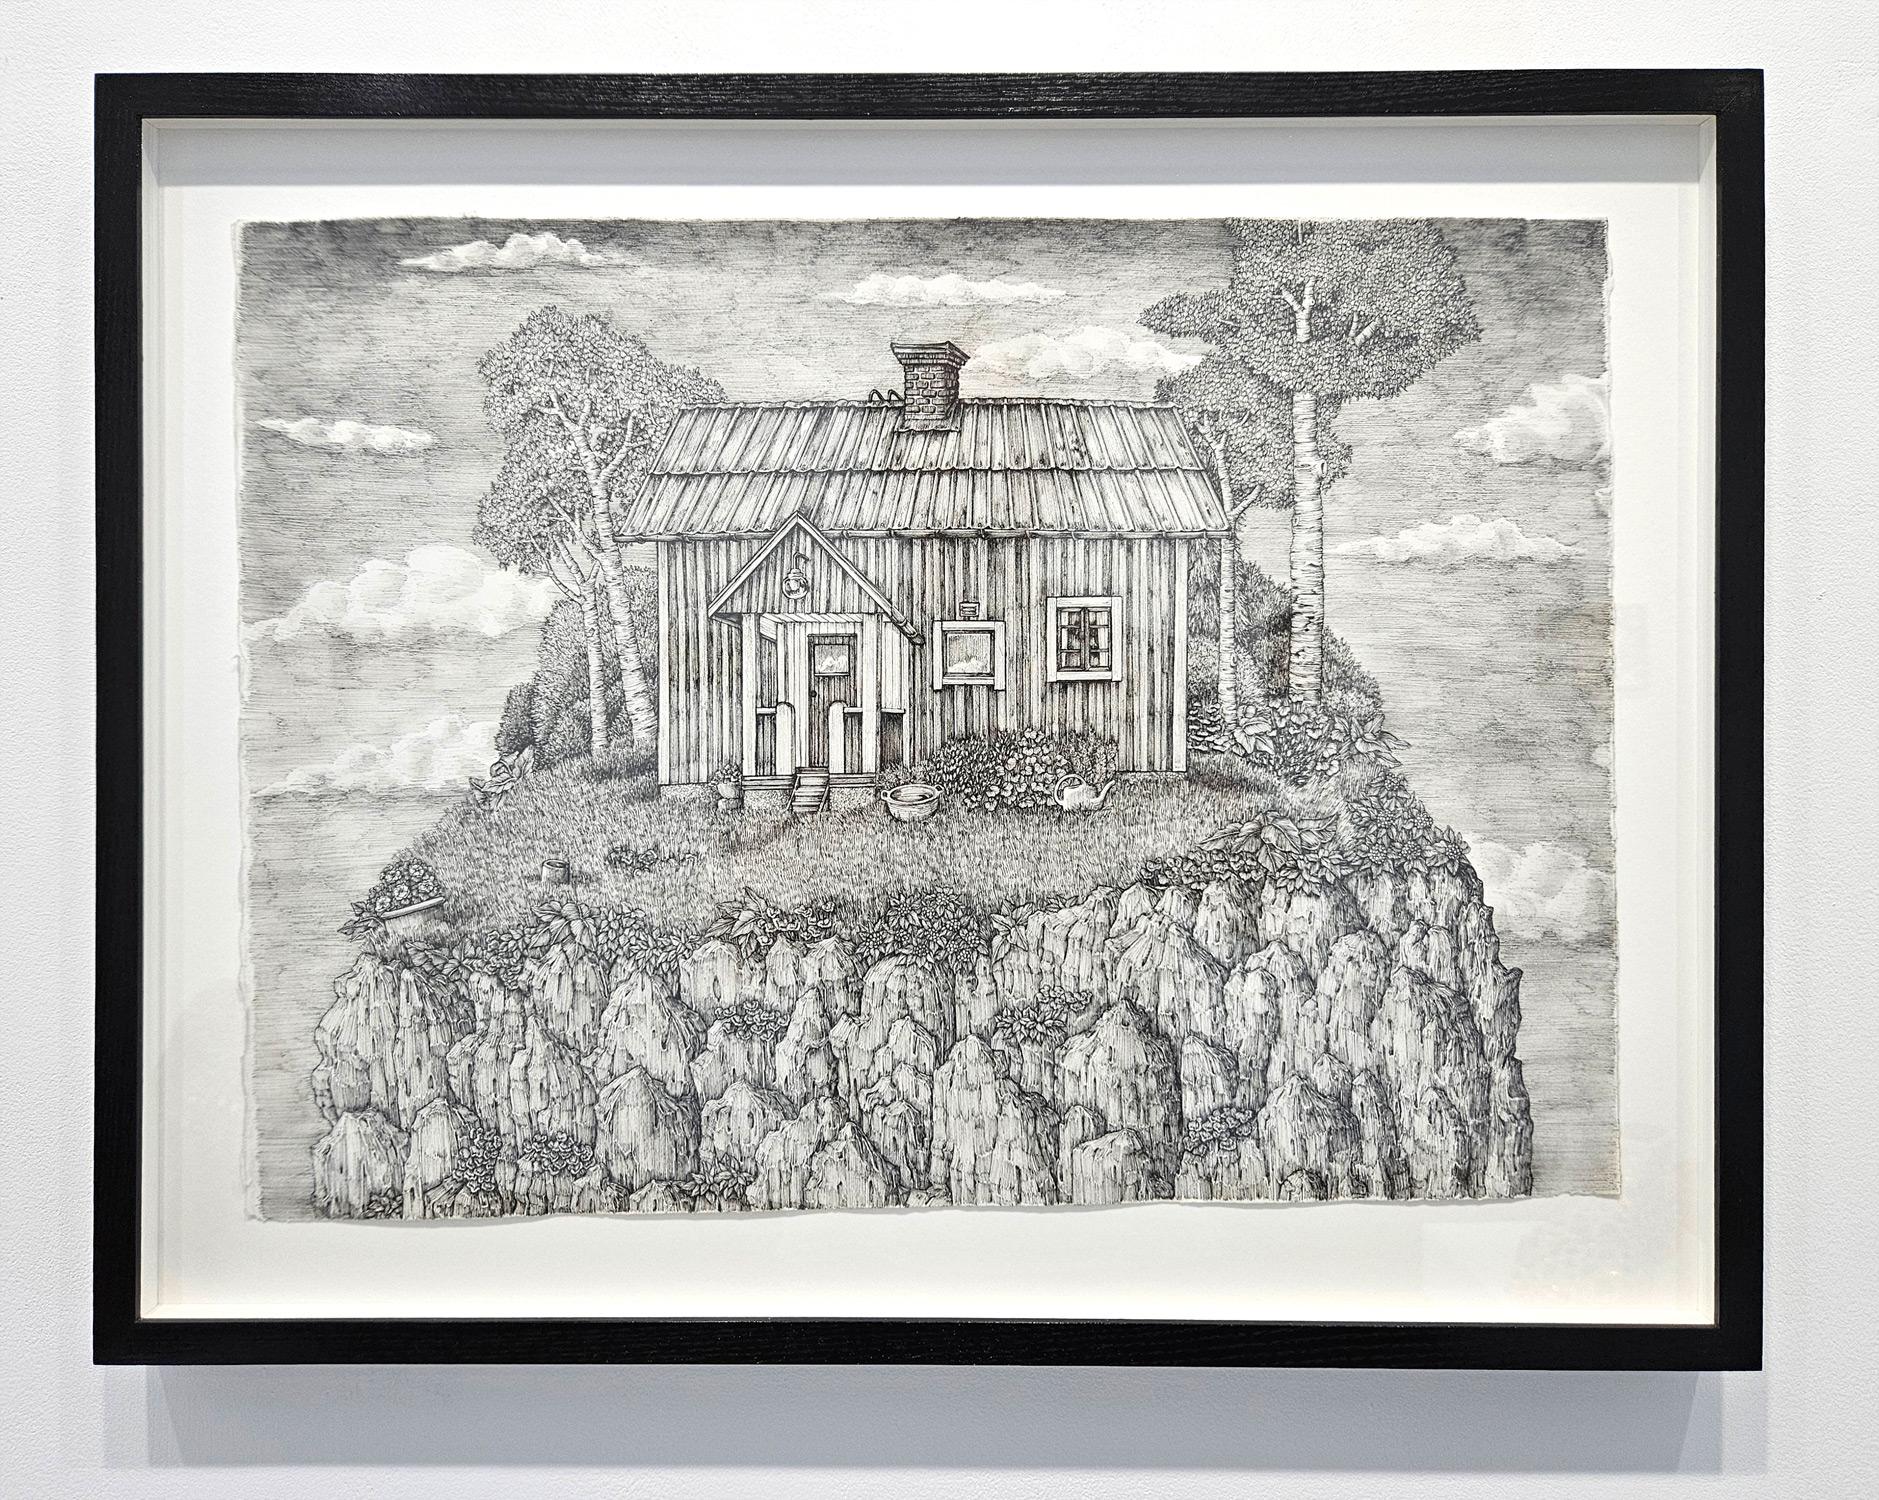 Olivia Kemp’s ink drawings are both intricate and expansive, fruit of an intuitive stream-of-consciousness approach to drawing. She works in pen on paper without any pencil underdrawing or preparatory sketches to create landscapes packed with